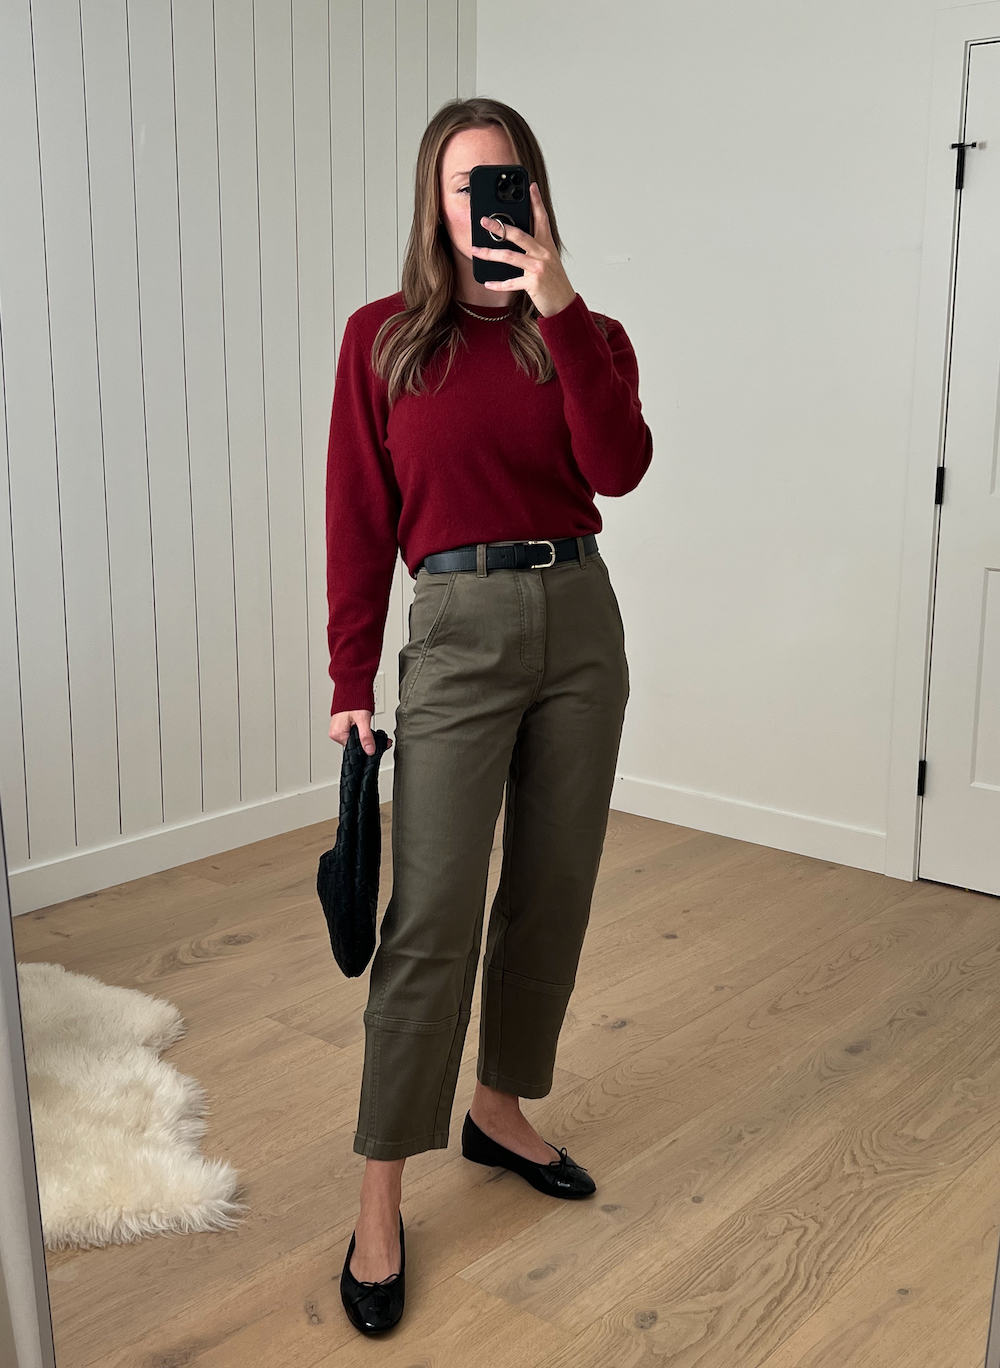 Christal wearing a deep red crewneck sweater with a black belt, olive green pants, and black ballet flats